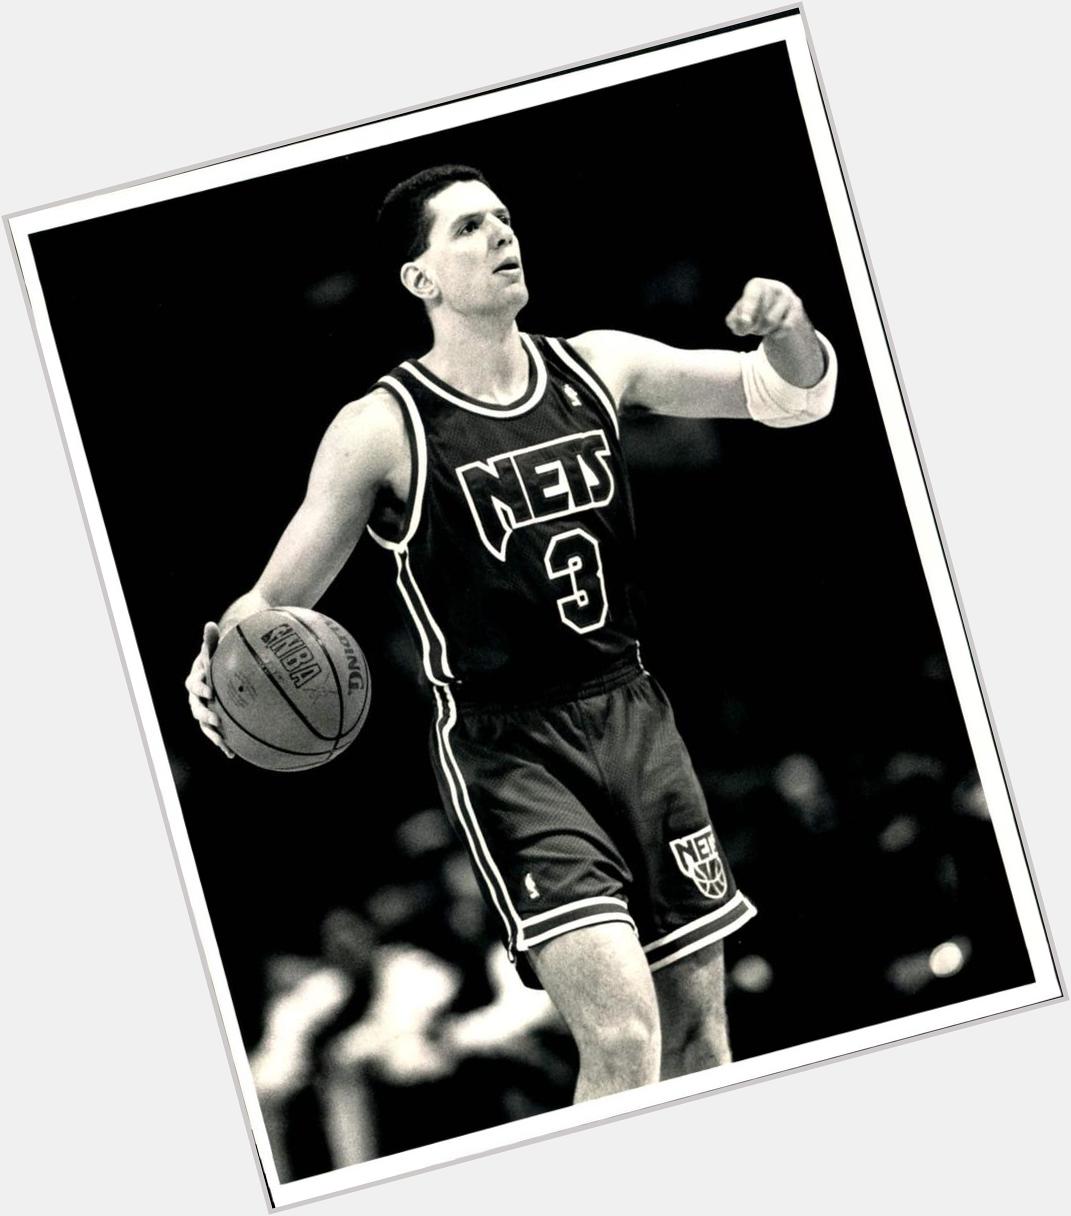 Happy birthday to one of the best European players of all time Drazen Petrovic 